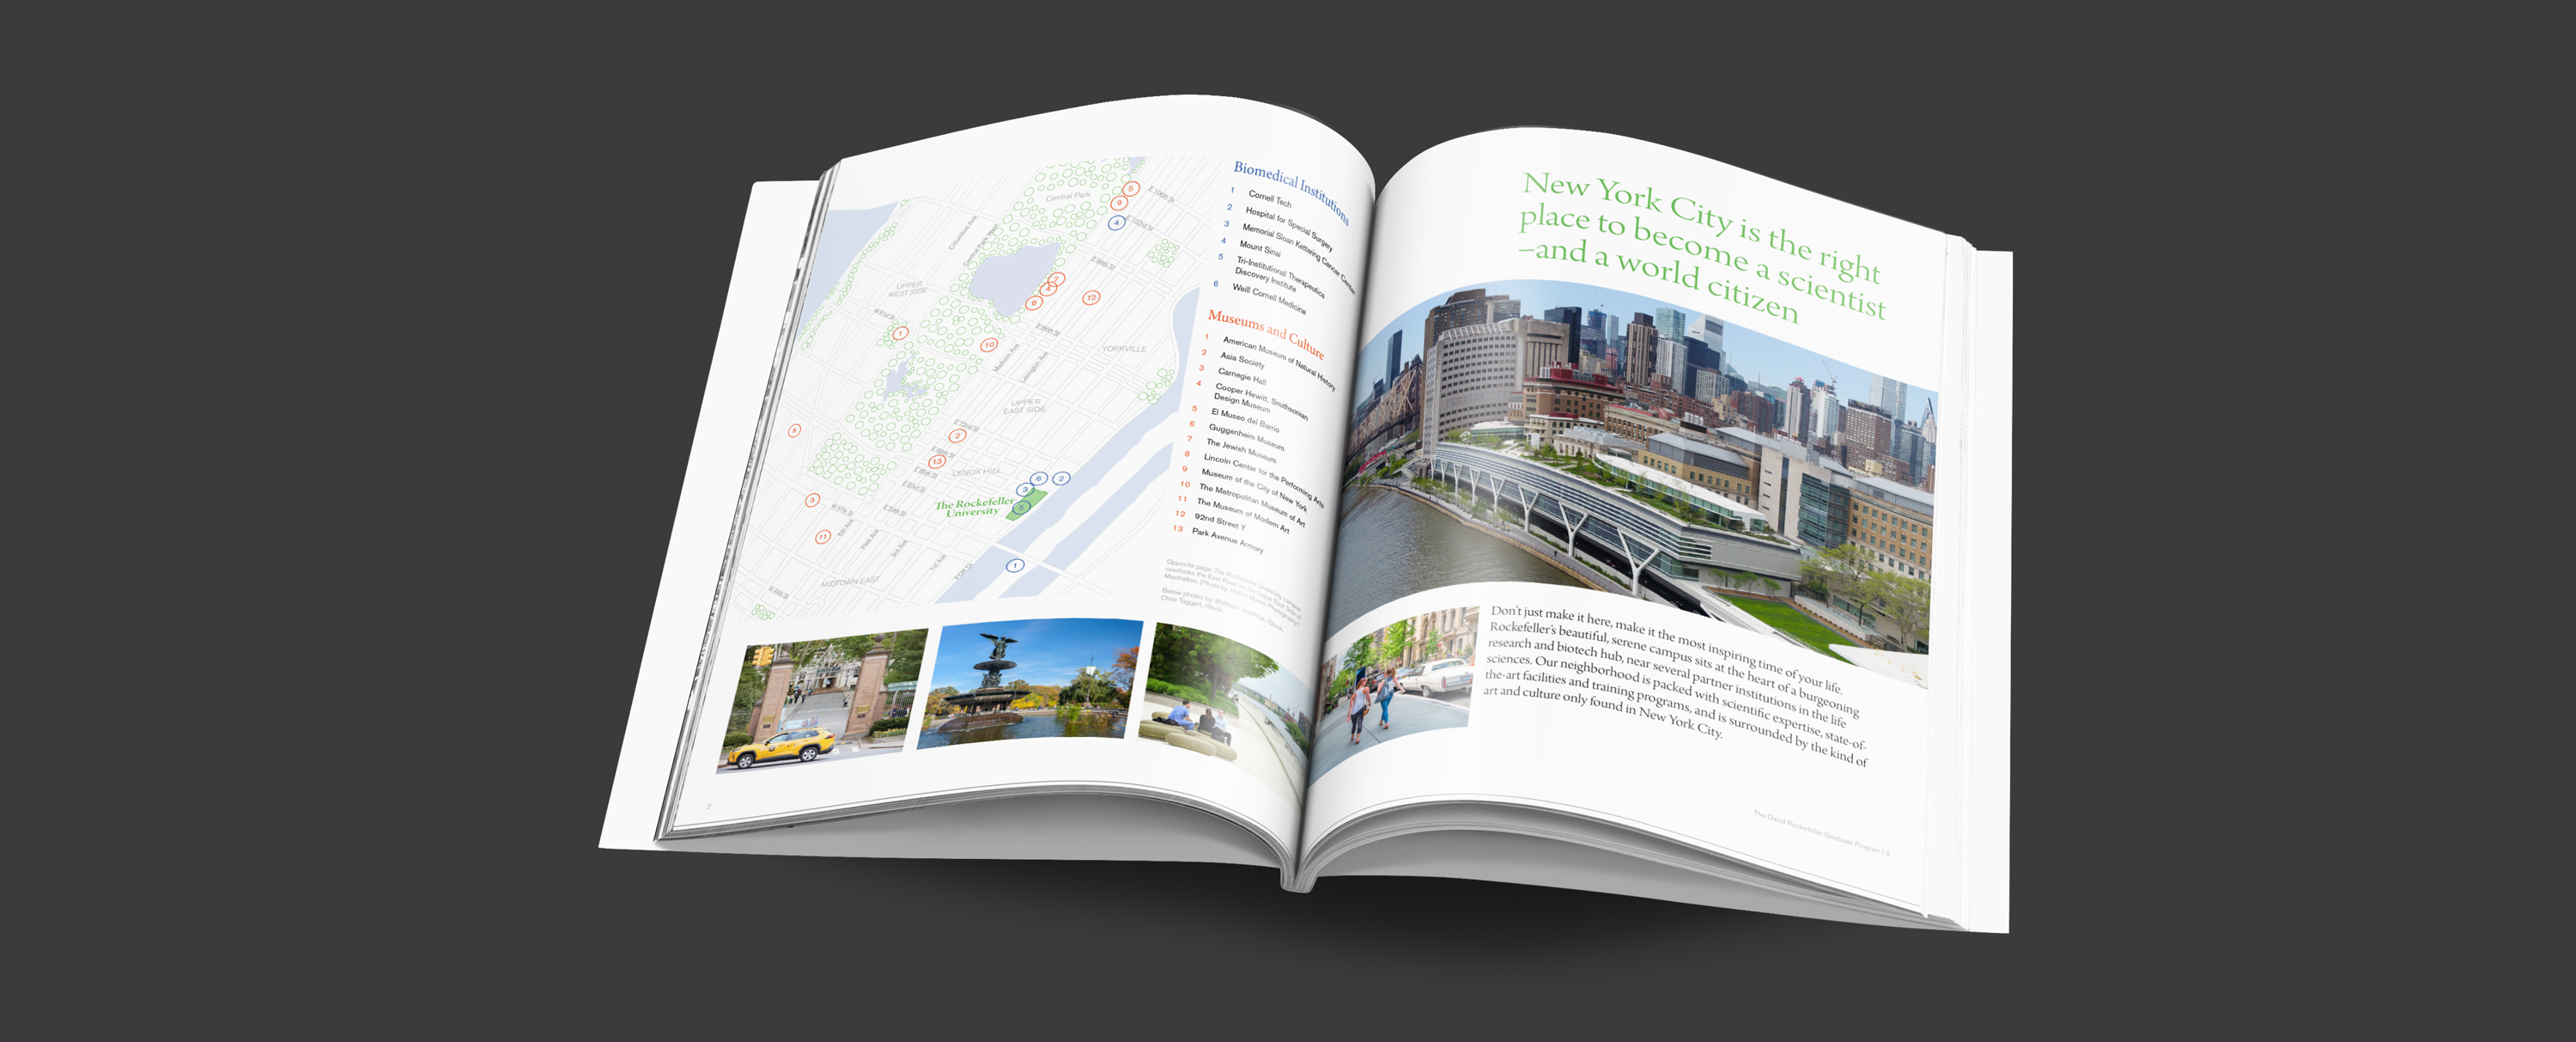 publication spread with map of The Rockefeller University campus